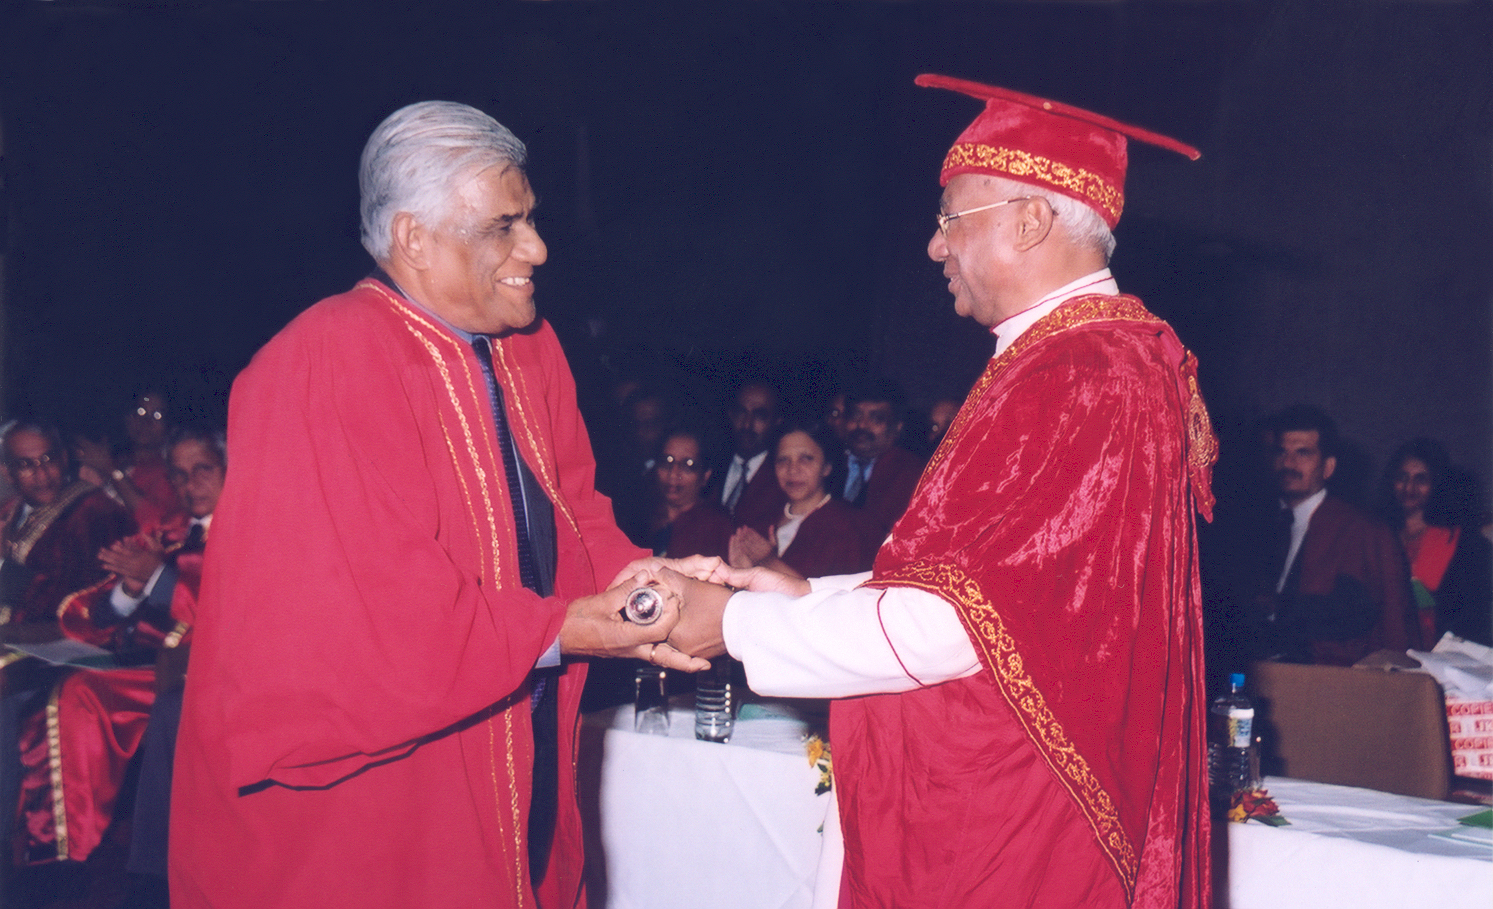 Prof. Samaranayake receiving the degree of D.Sc. ( Honoris Causa ) from Most Rev Bishop Oswald Gomis, Chacellor of the University of Colombo at the 2004 convocation held in January 2005